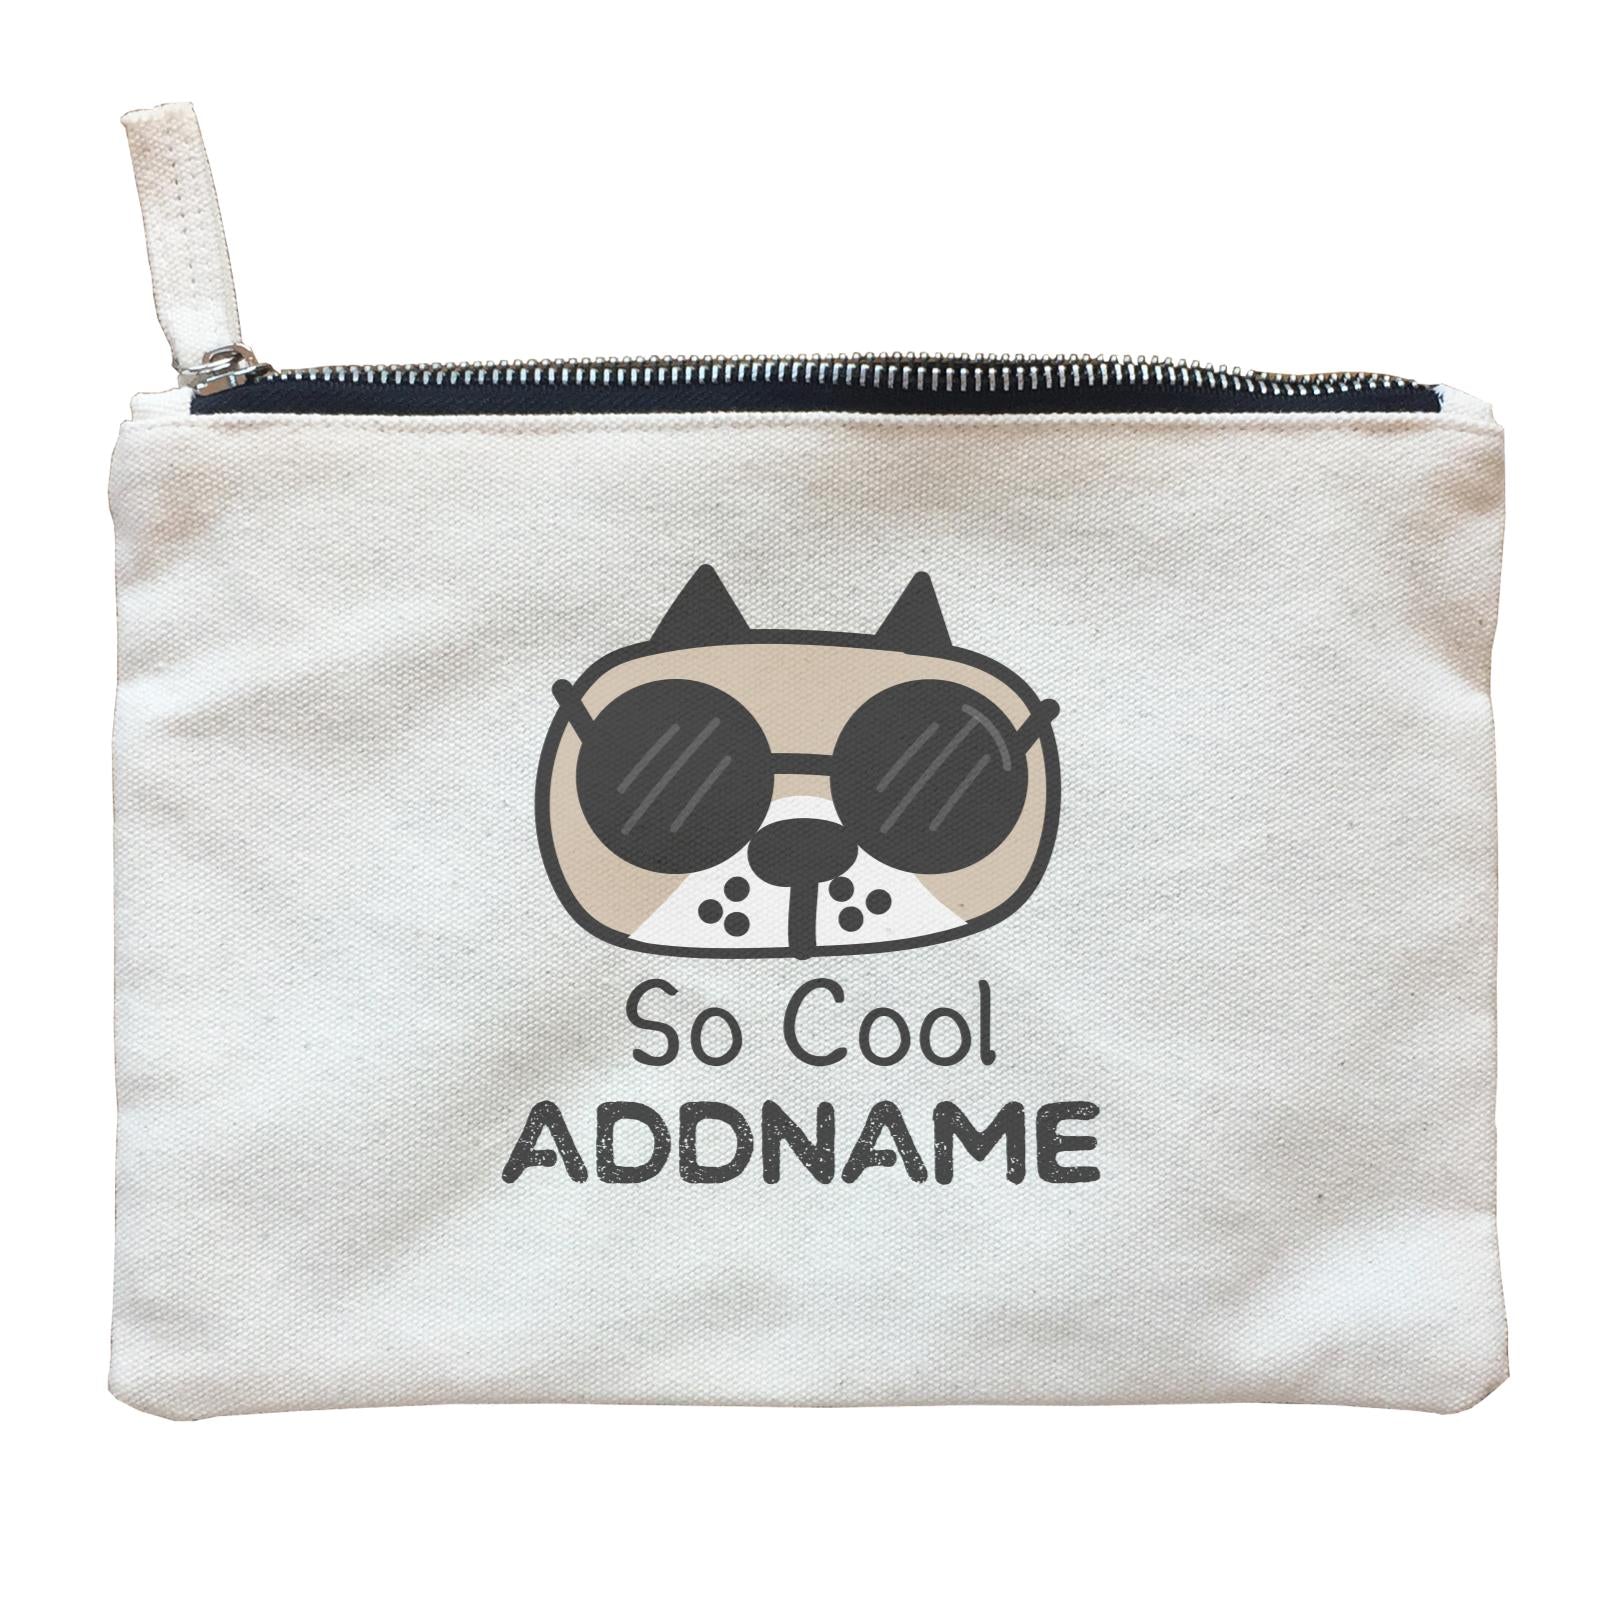 Cute Animals And Friends Series Cool Dog With Sunglasses Addname Zipper Pouch